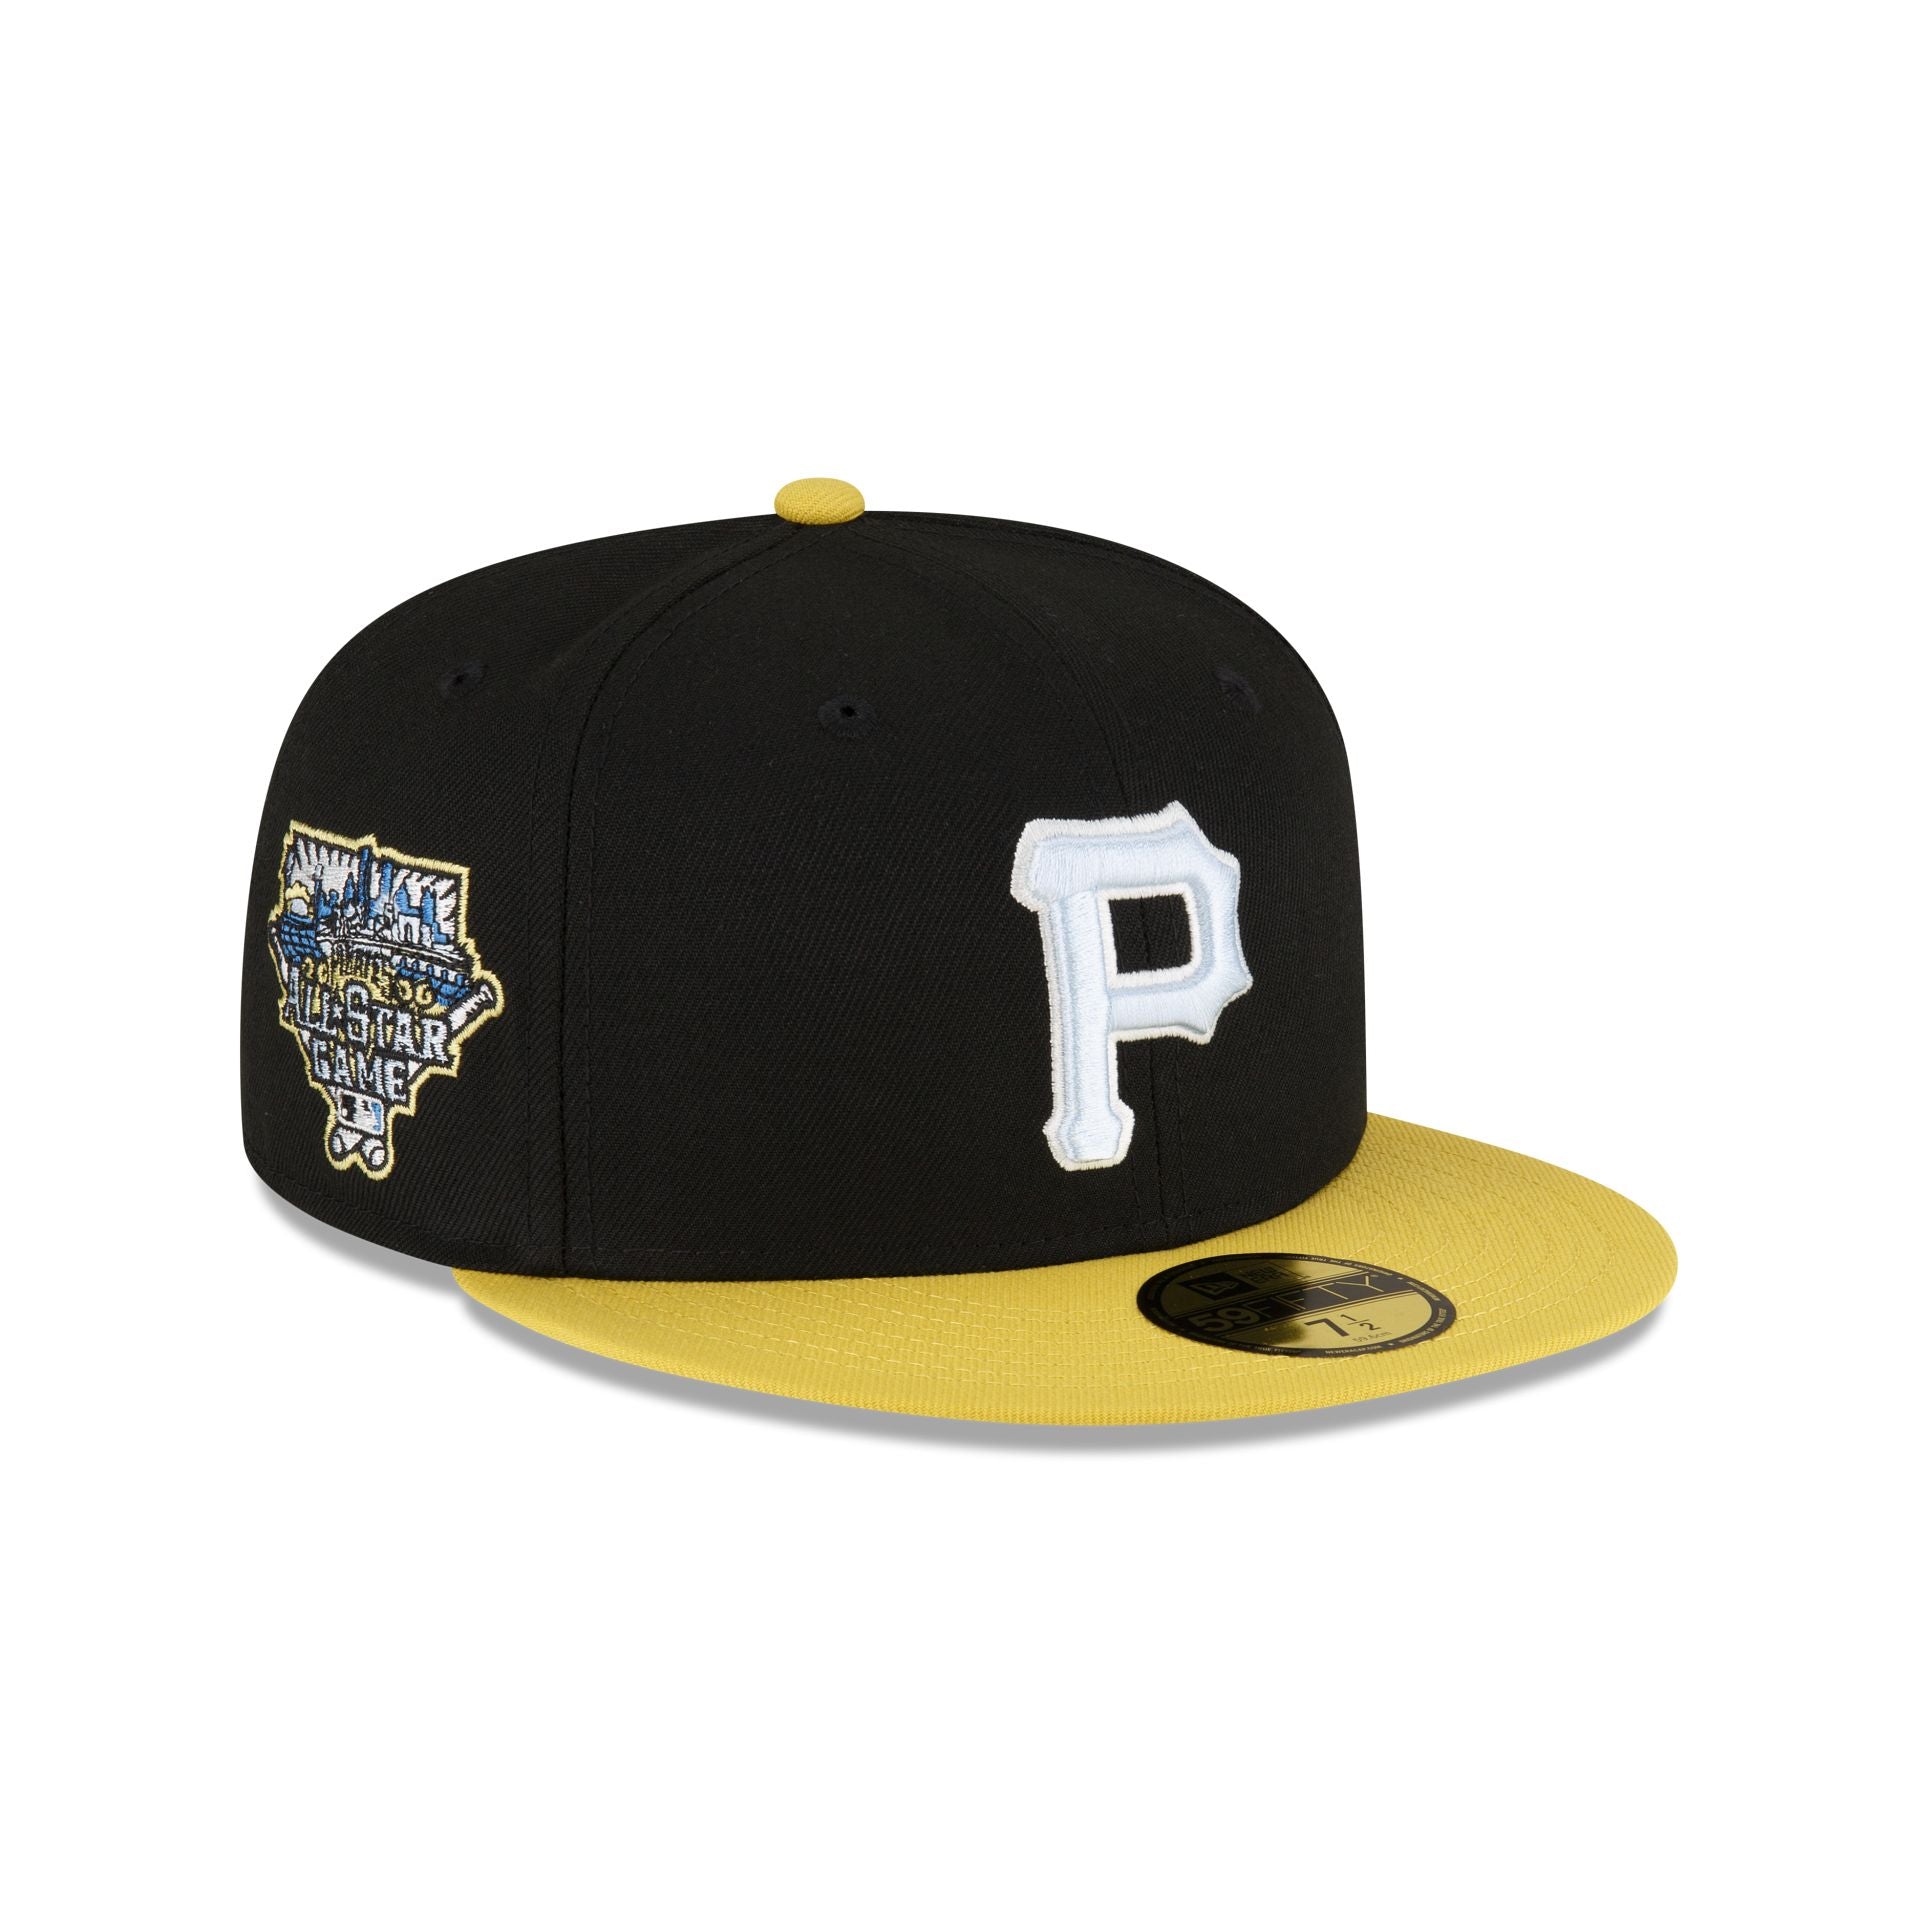 Pittsburgh Pirates New Era Low Profile 59FIFTY Fitted Hat - Scarlet